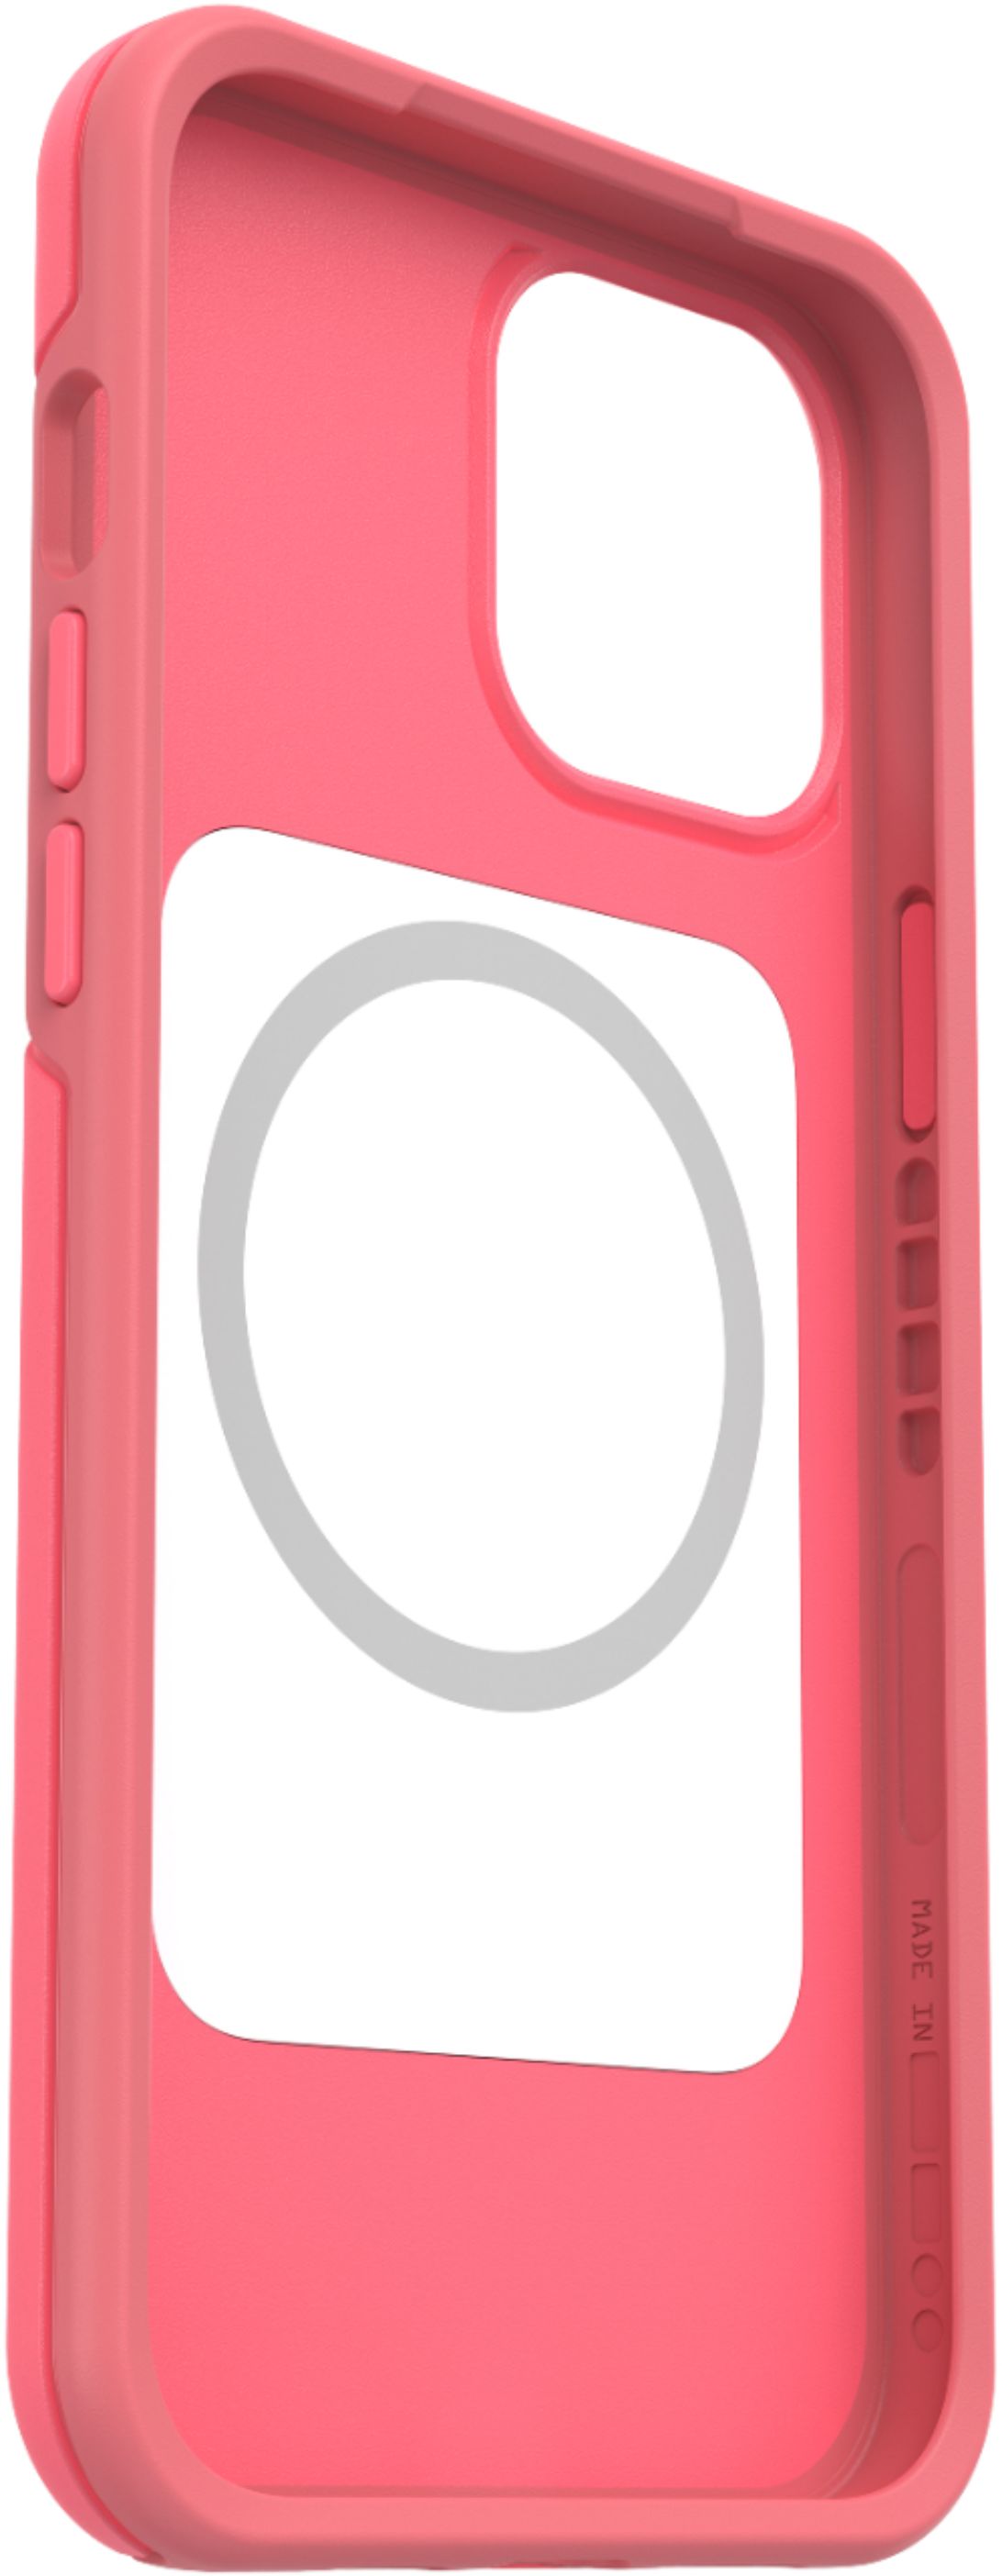 Left View: OtterBox - Commuter Antimicrobial Case for Apple iPhone 12 mini - Bespoke Way